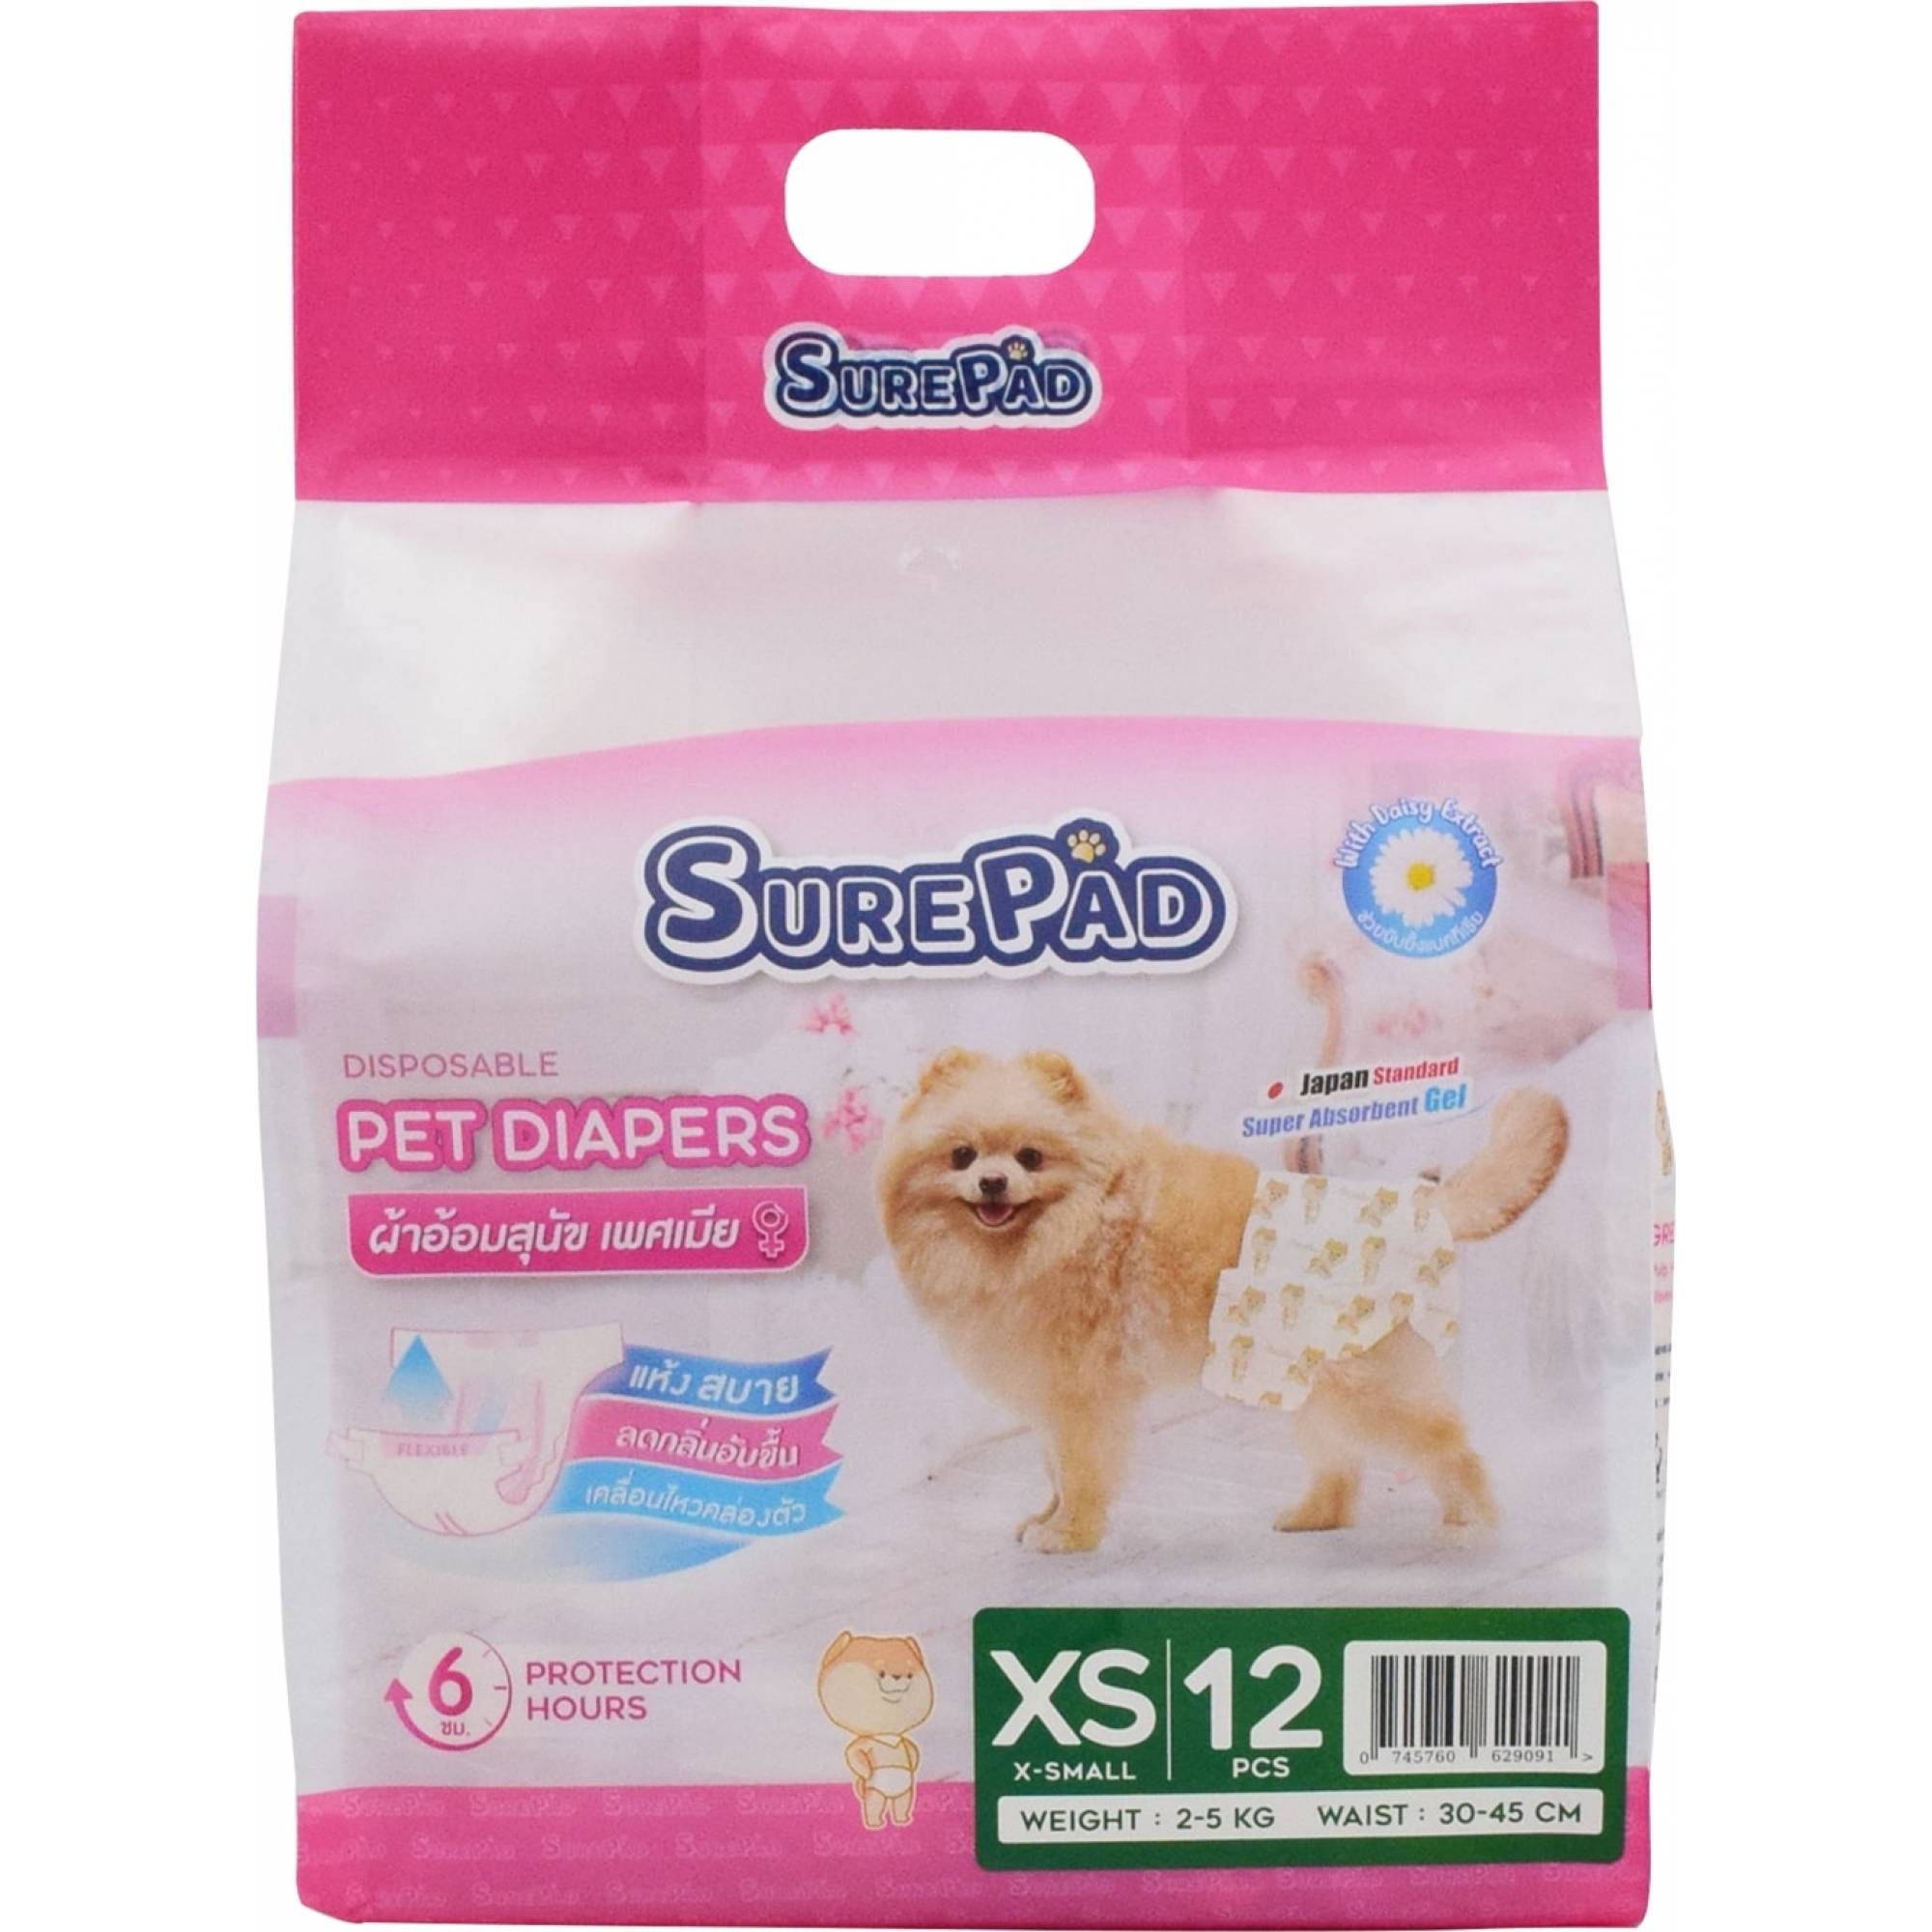 SurePad - Disposable Female Diapers For Dog & Cat 12pcs (Xtra Small)